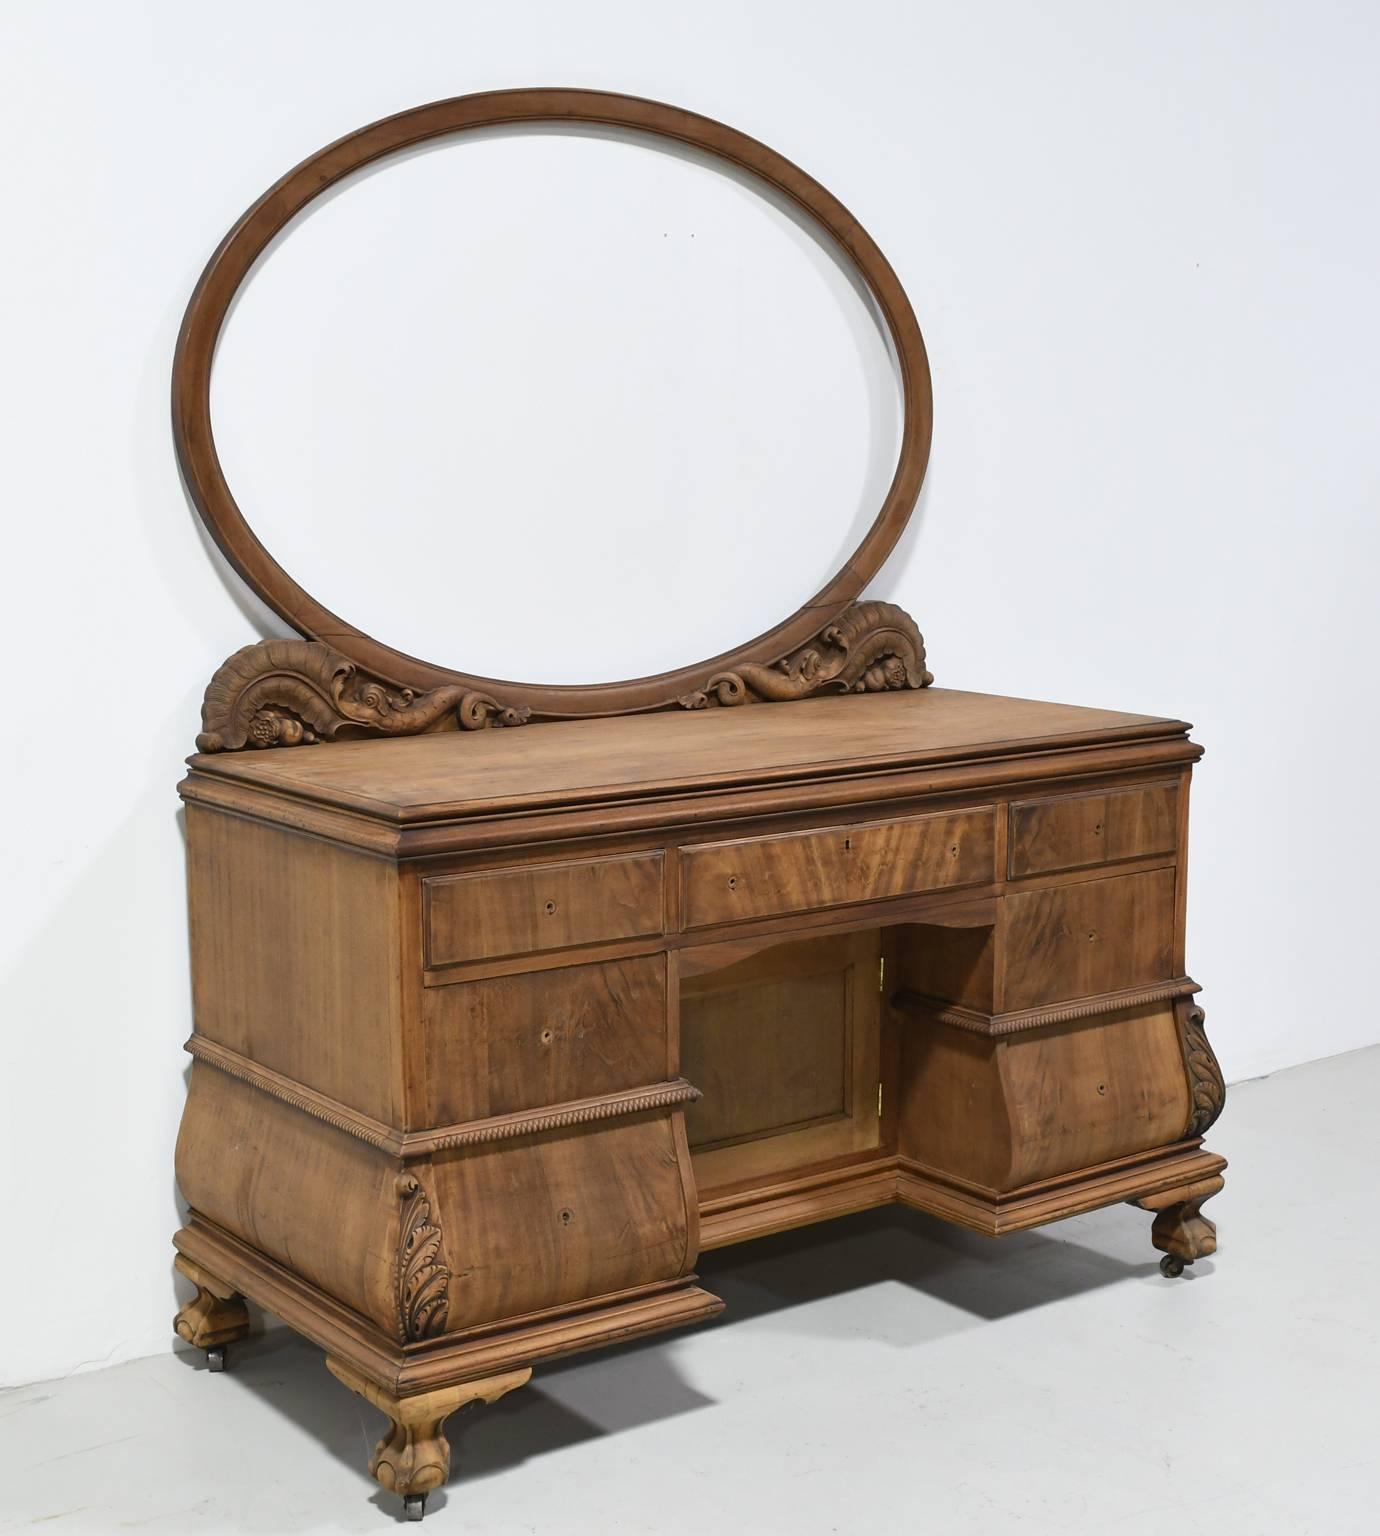 Belle Époque Belle Epoque Dressing Table in Mahogany with Oval Mirror with Carved Supports